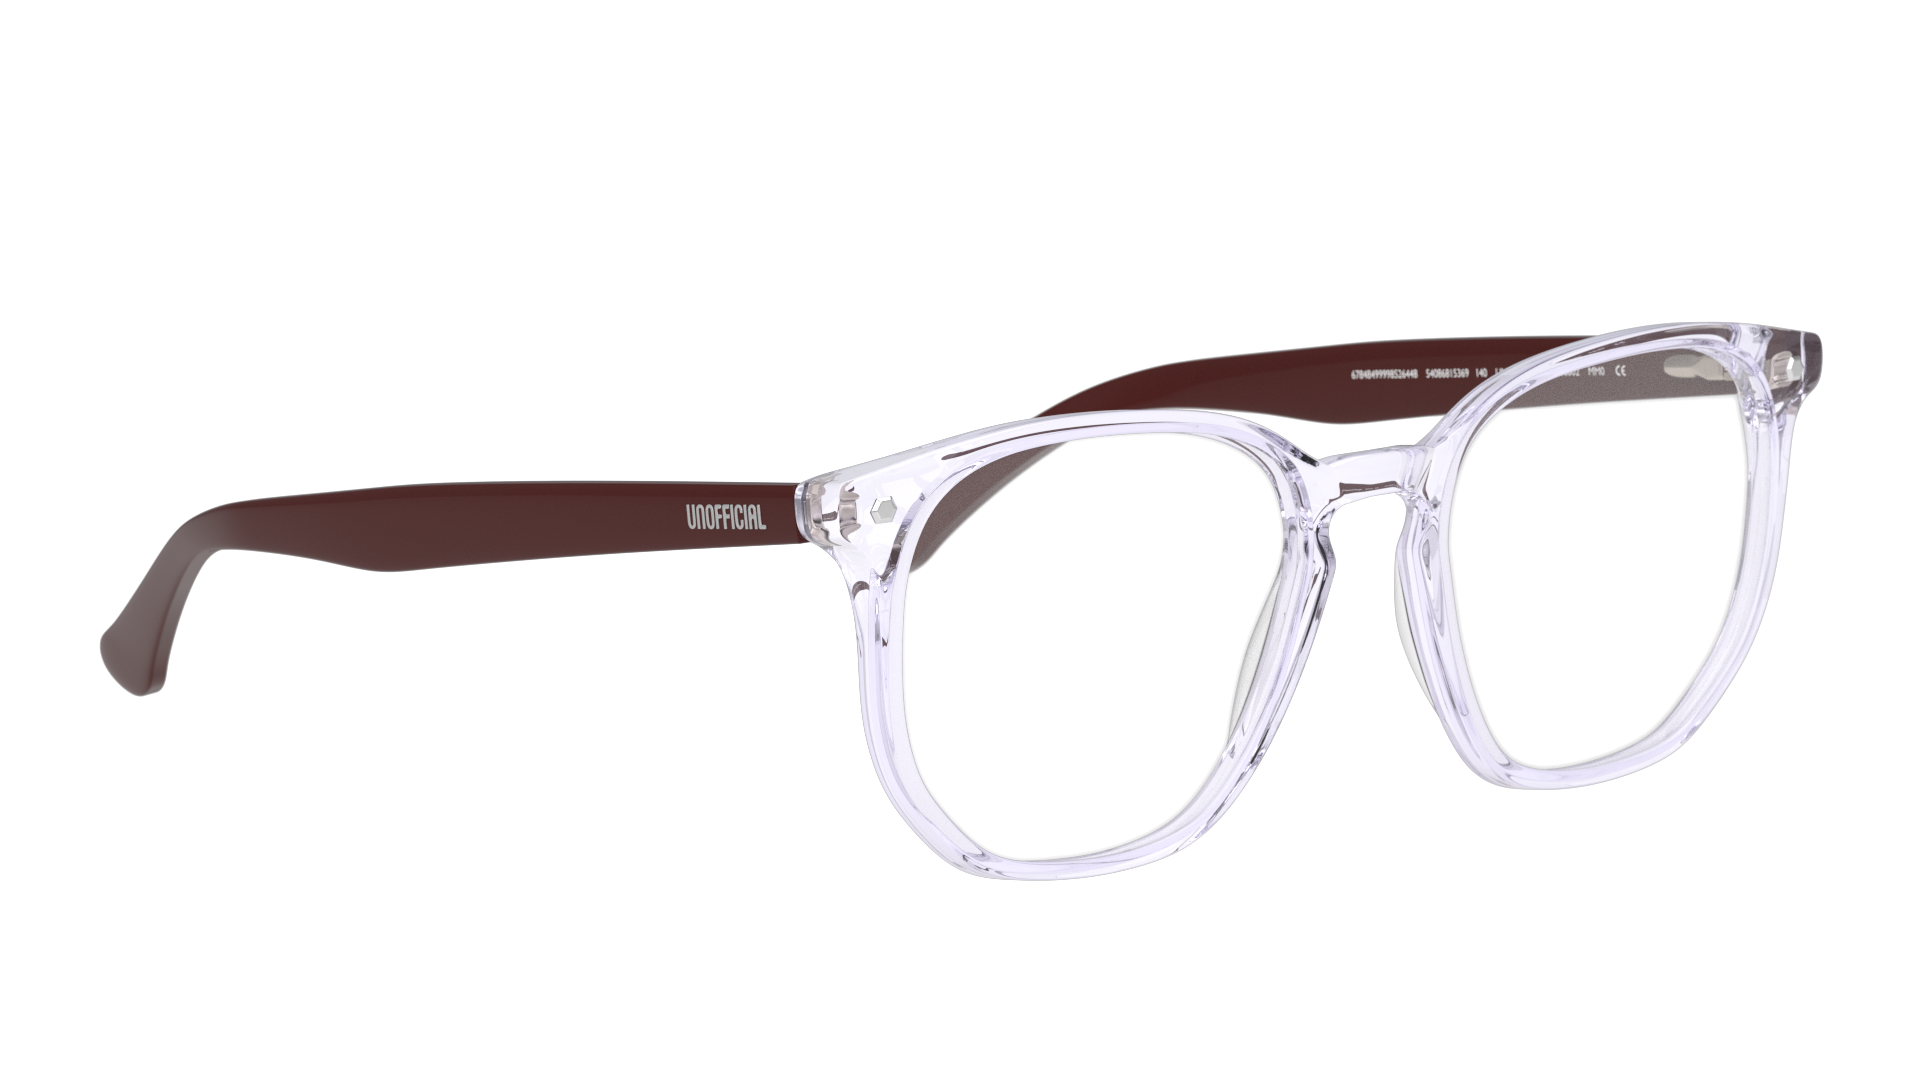 Angle_Right01 Unofficial UNOM0063 (GU00) Glasses Transparent / Grey